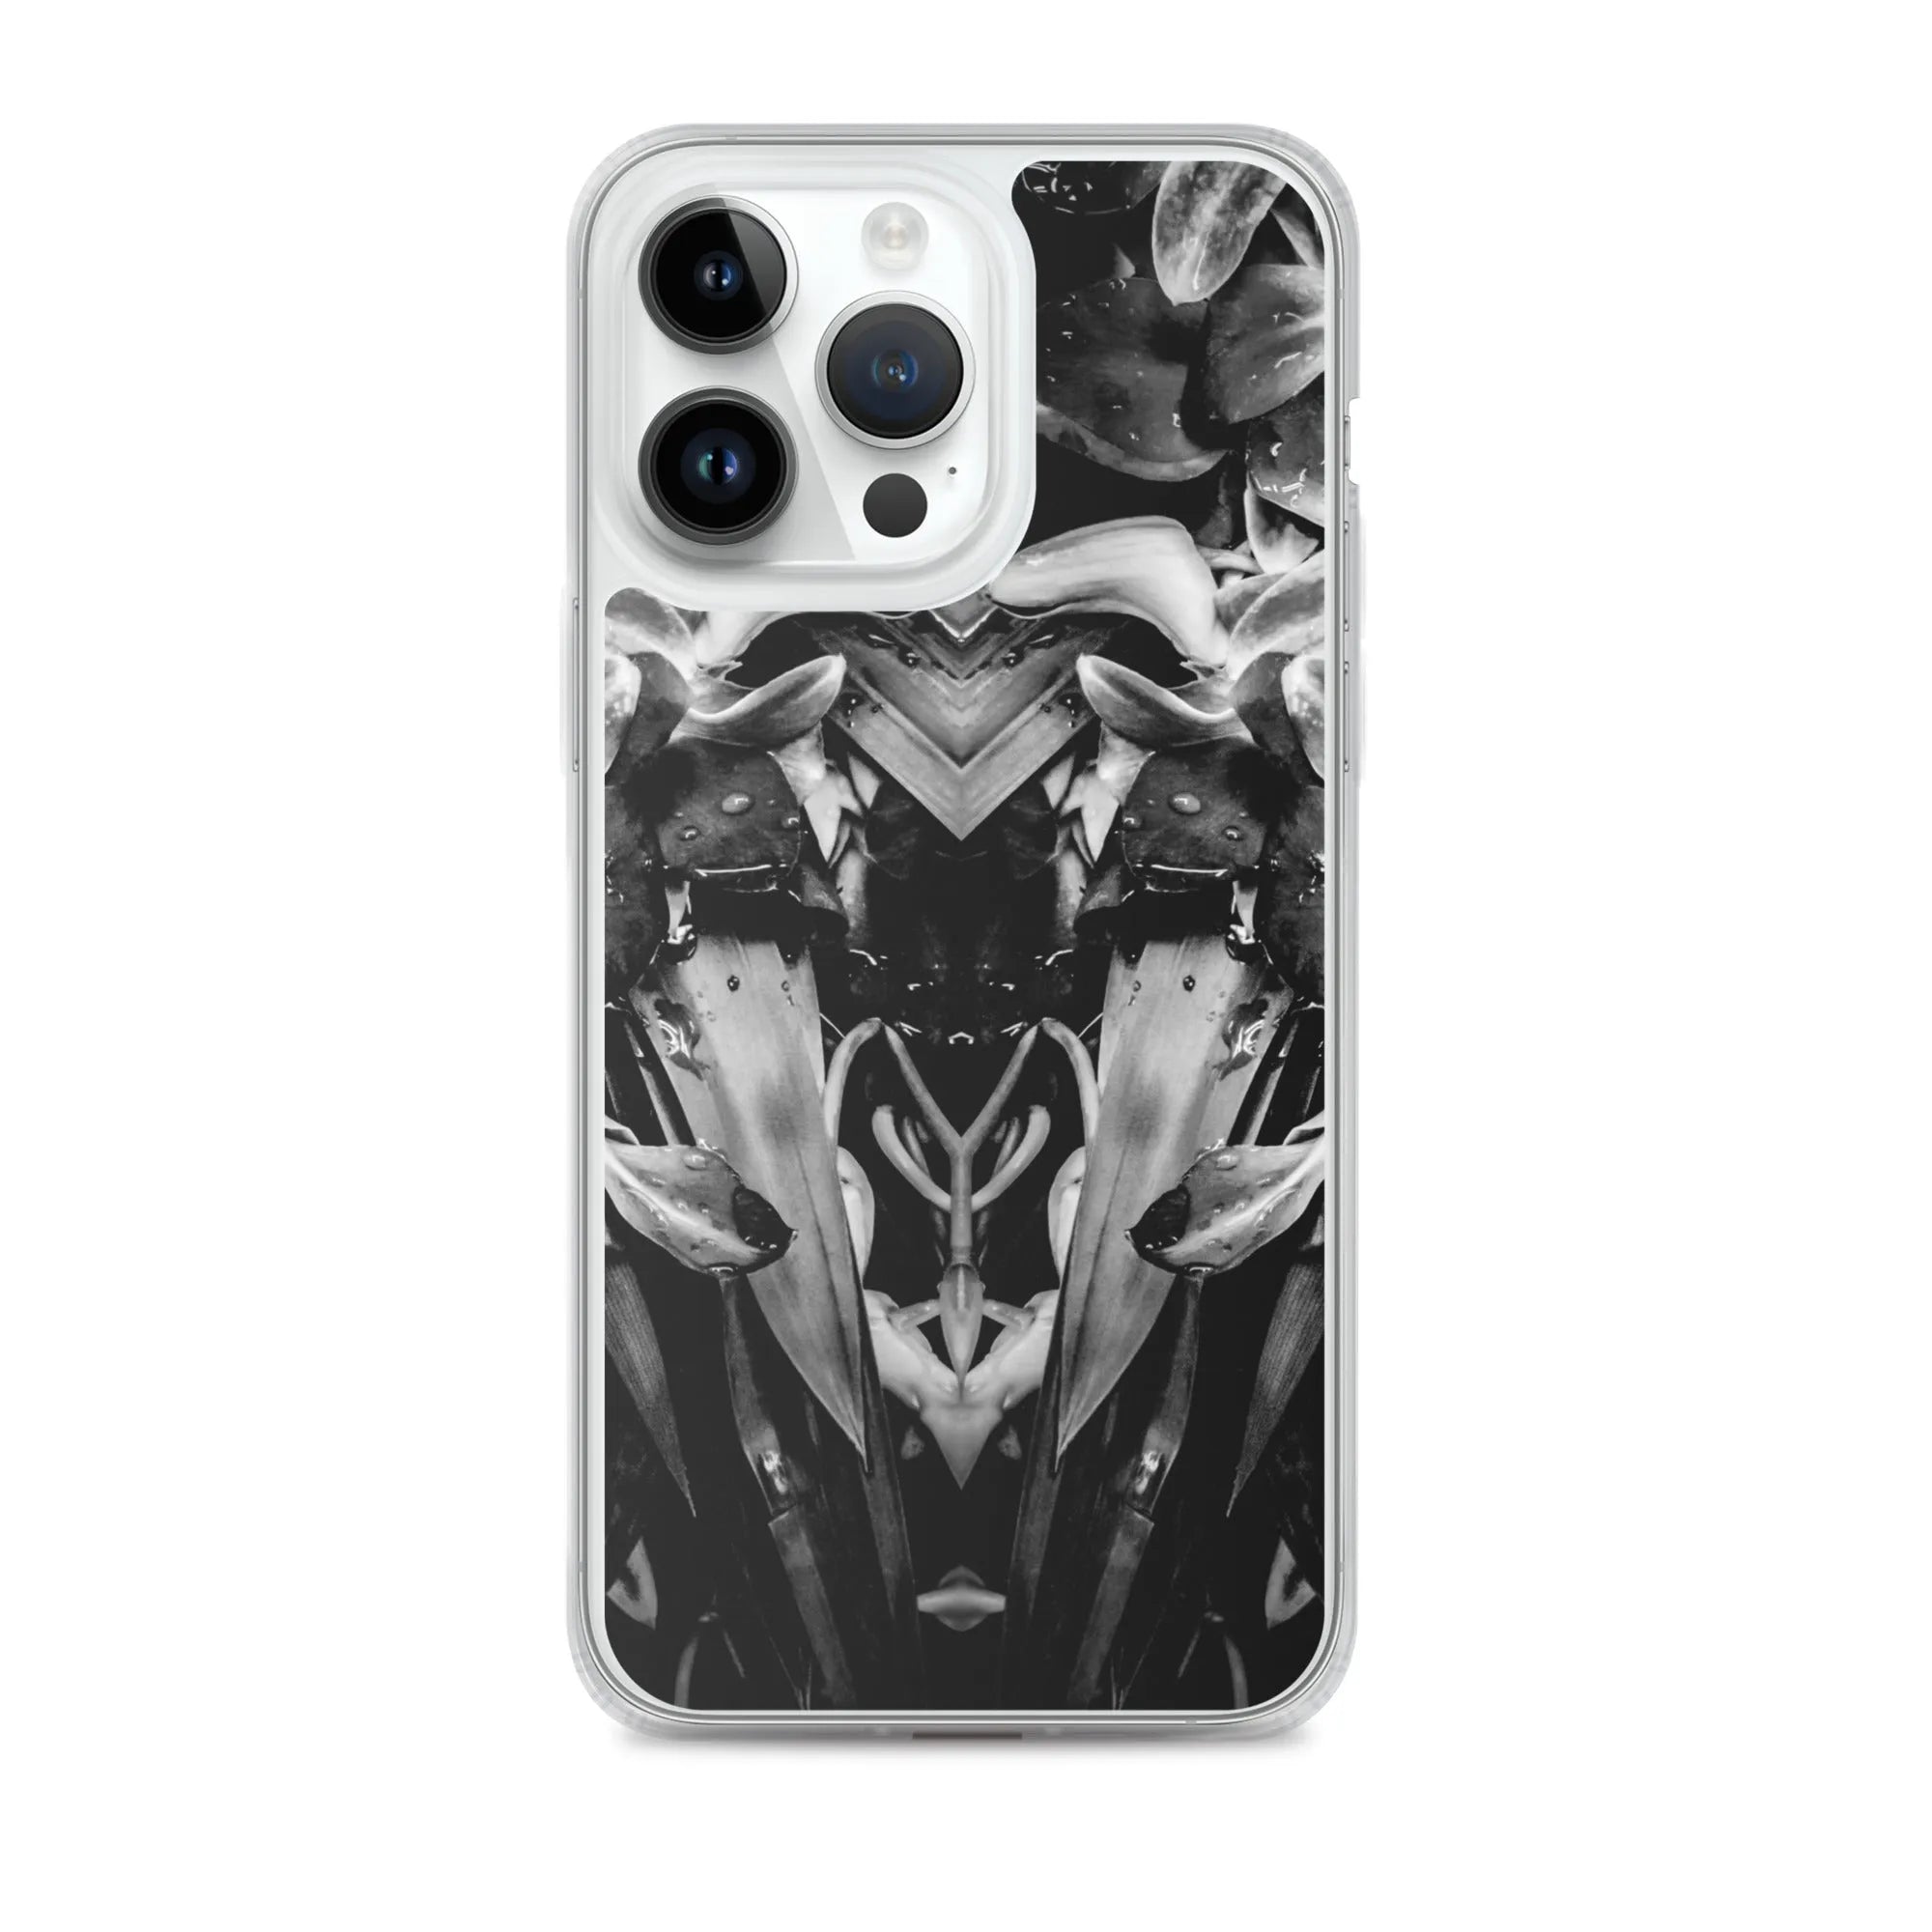 Ruby Reds² Floral Iphone Case - Black And White - Iphone 14 Pro Max - Mobile Phone Cases - Aesthetic Art